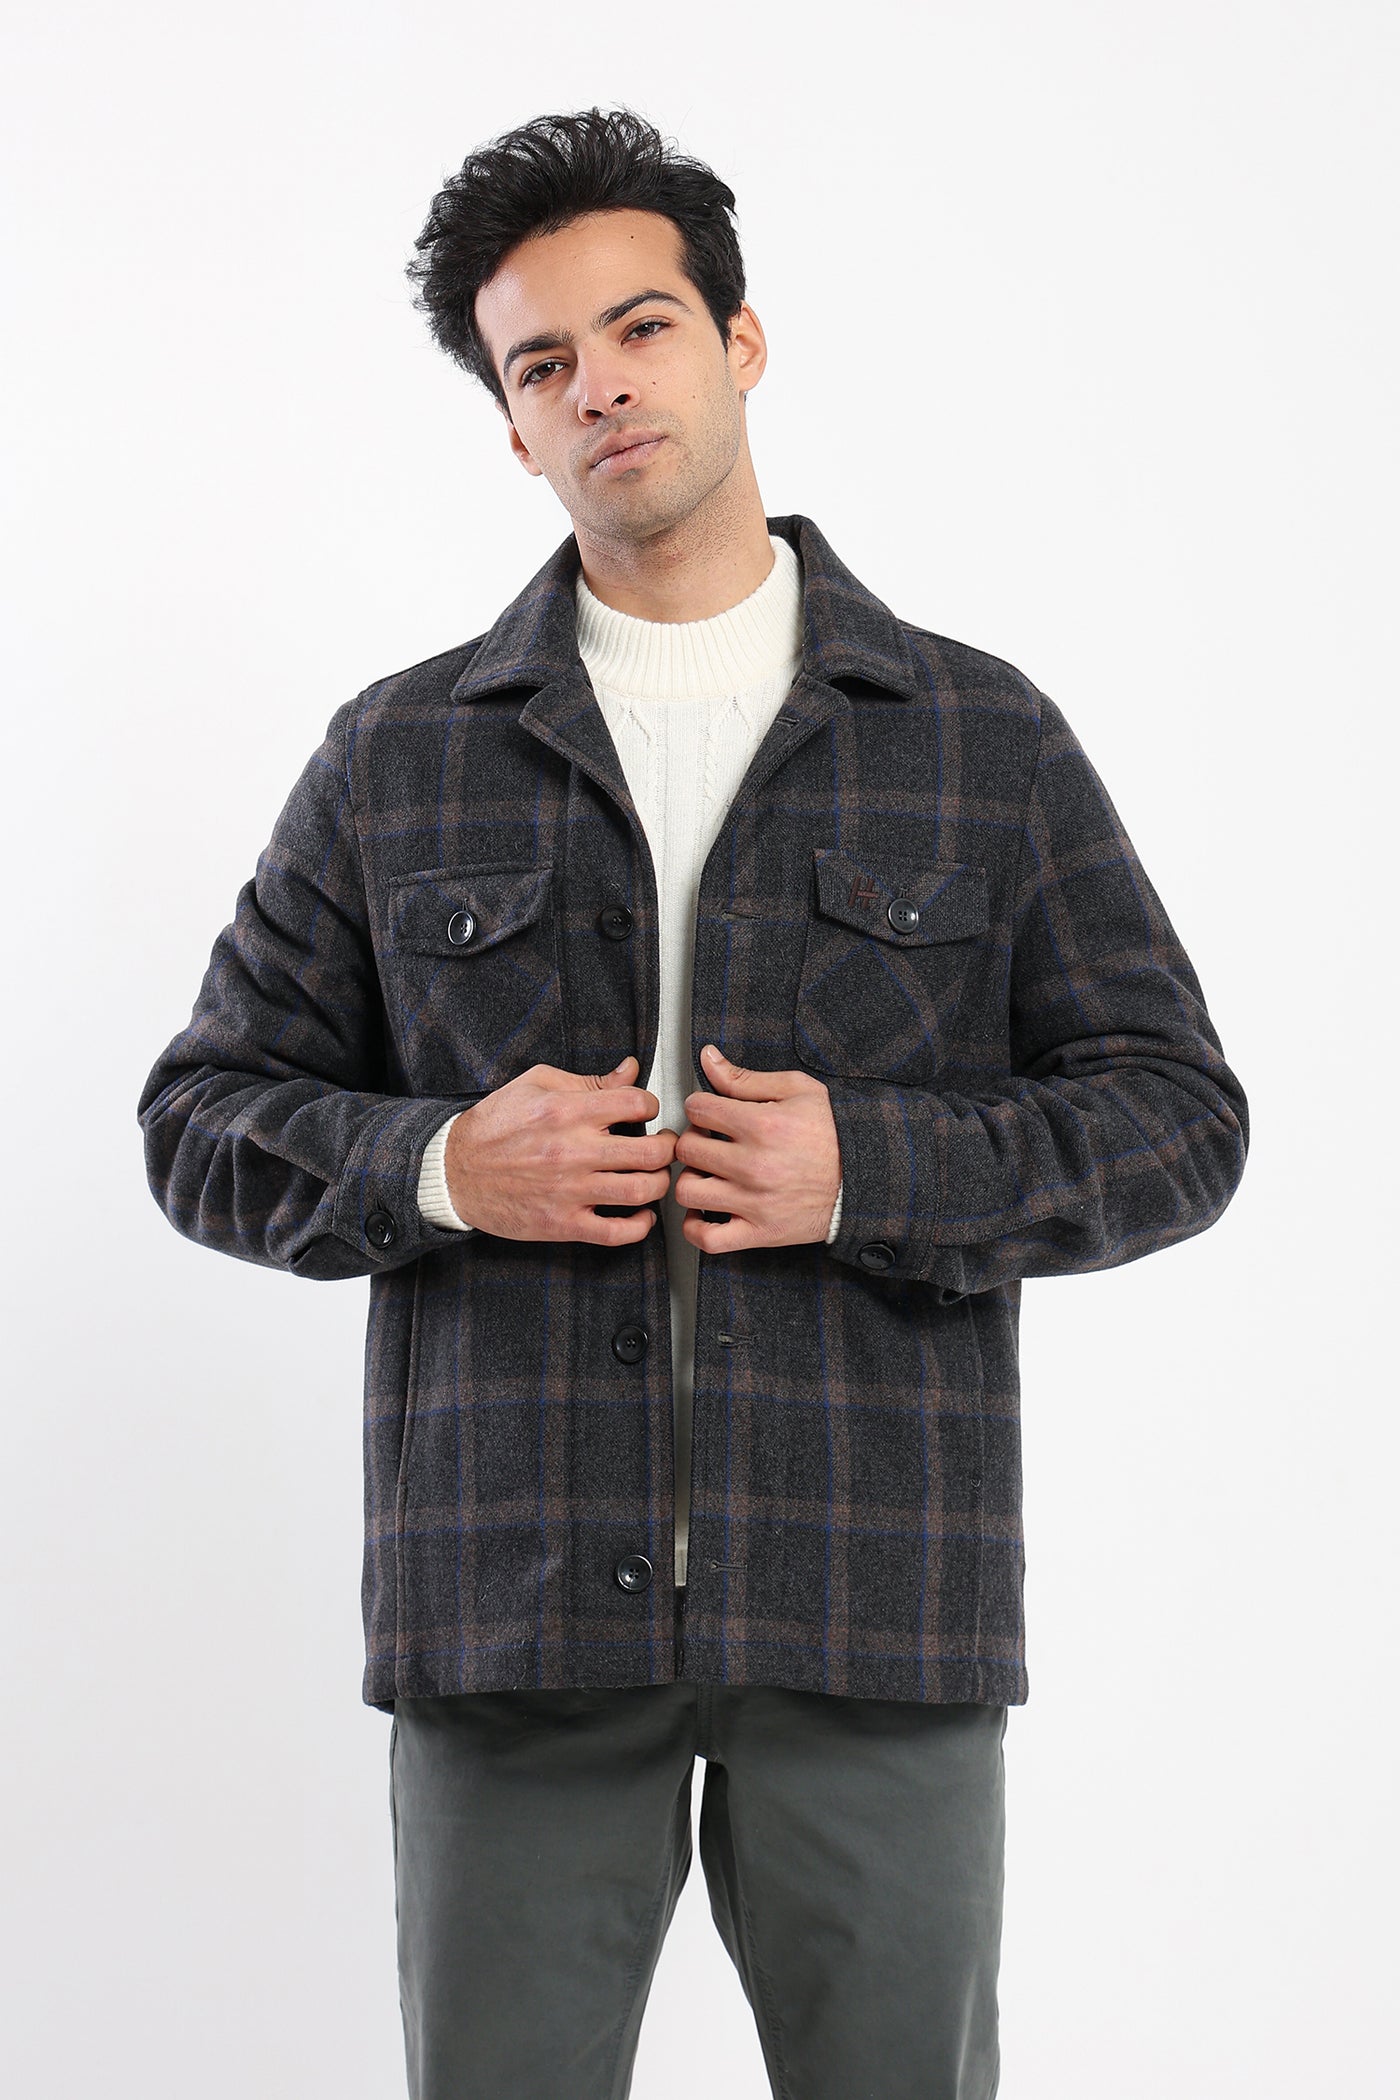 Overshirt - Checkered - Leather Inside